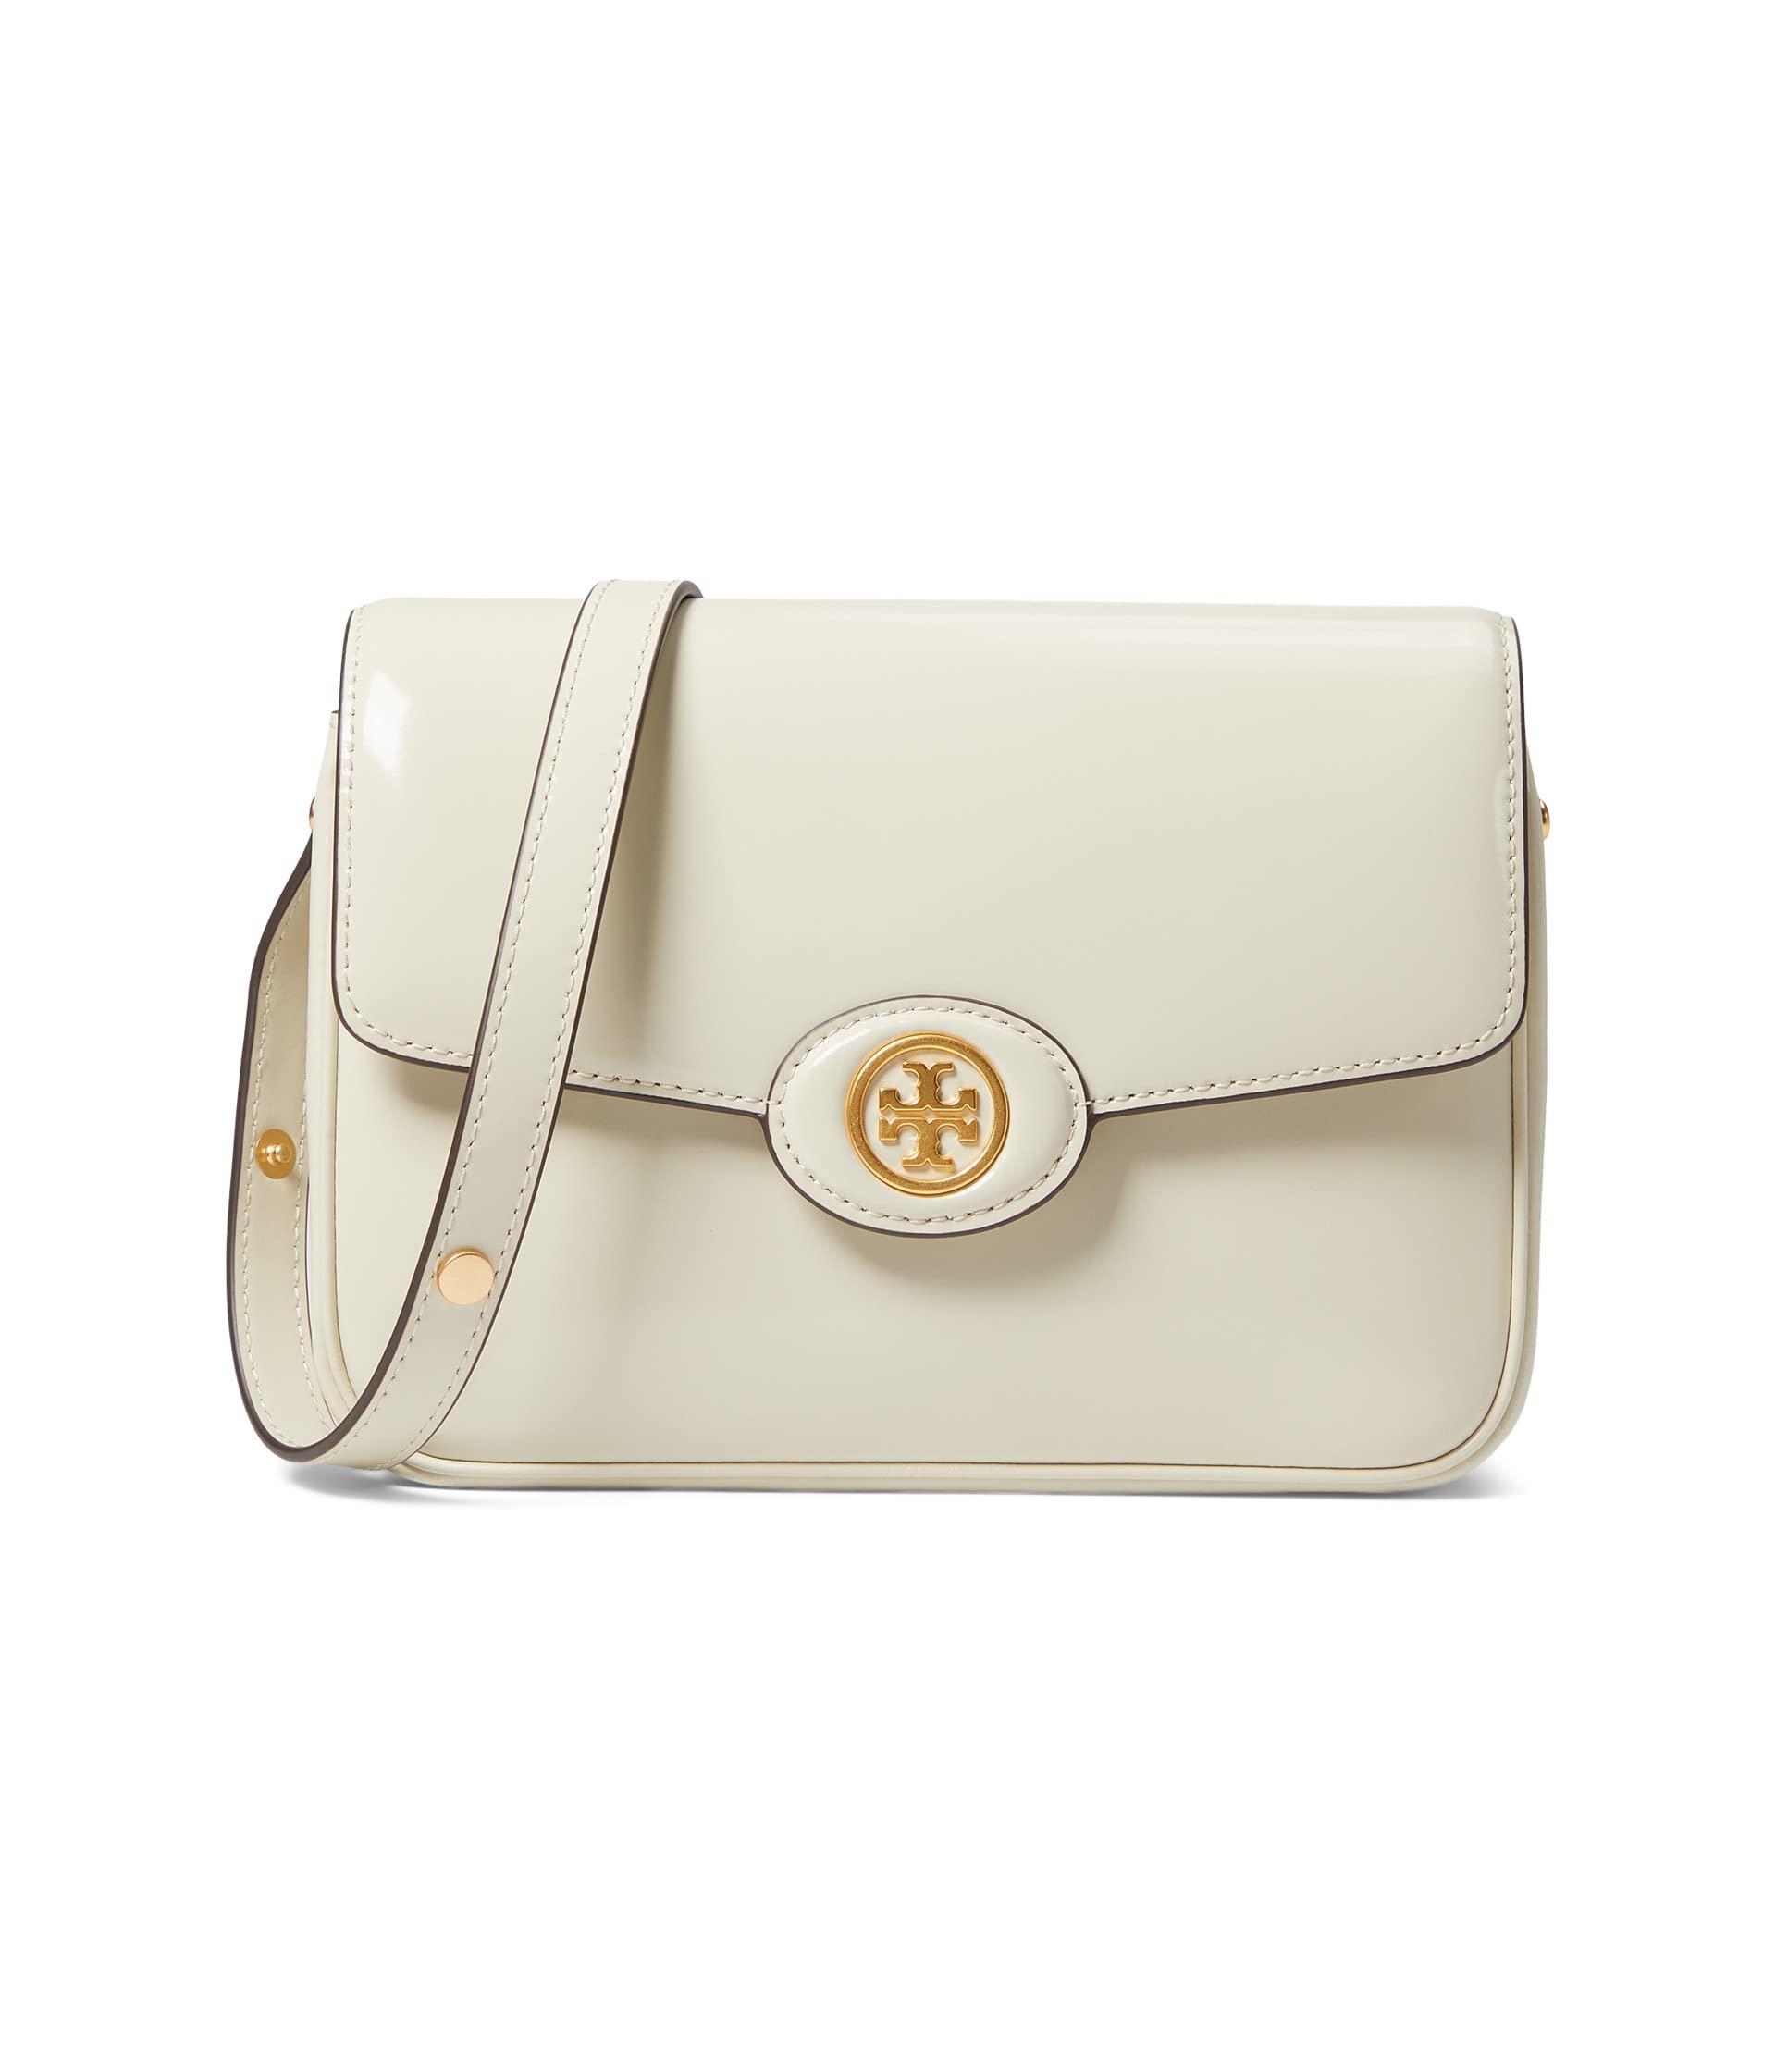 Tory Burch Robinson Spazzolato Convertible Shoulder Bag in Natural | Lyst